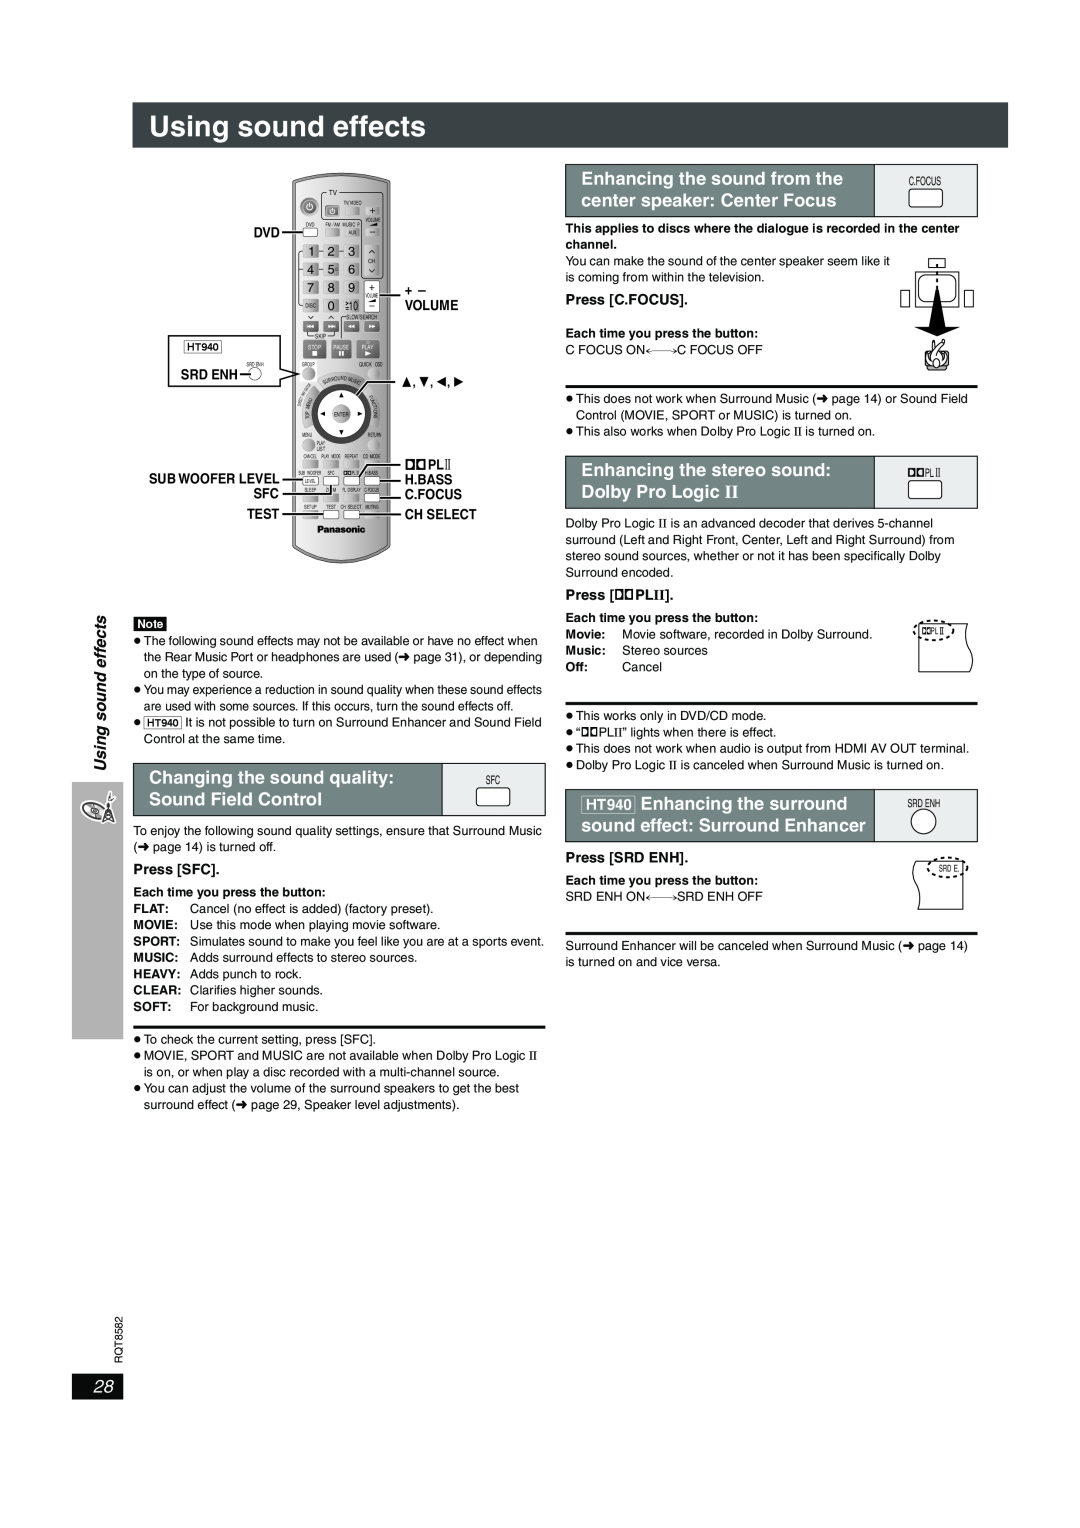 Panasonic SC-HT740 Using sound effects, Changing the sound quality, Sound Field Control, Enhancing the sound from the 